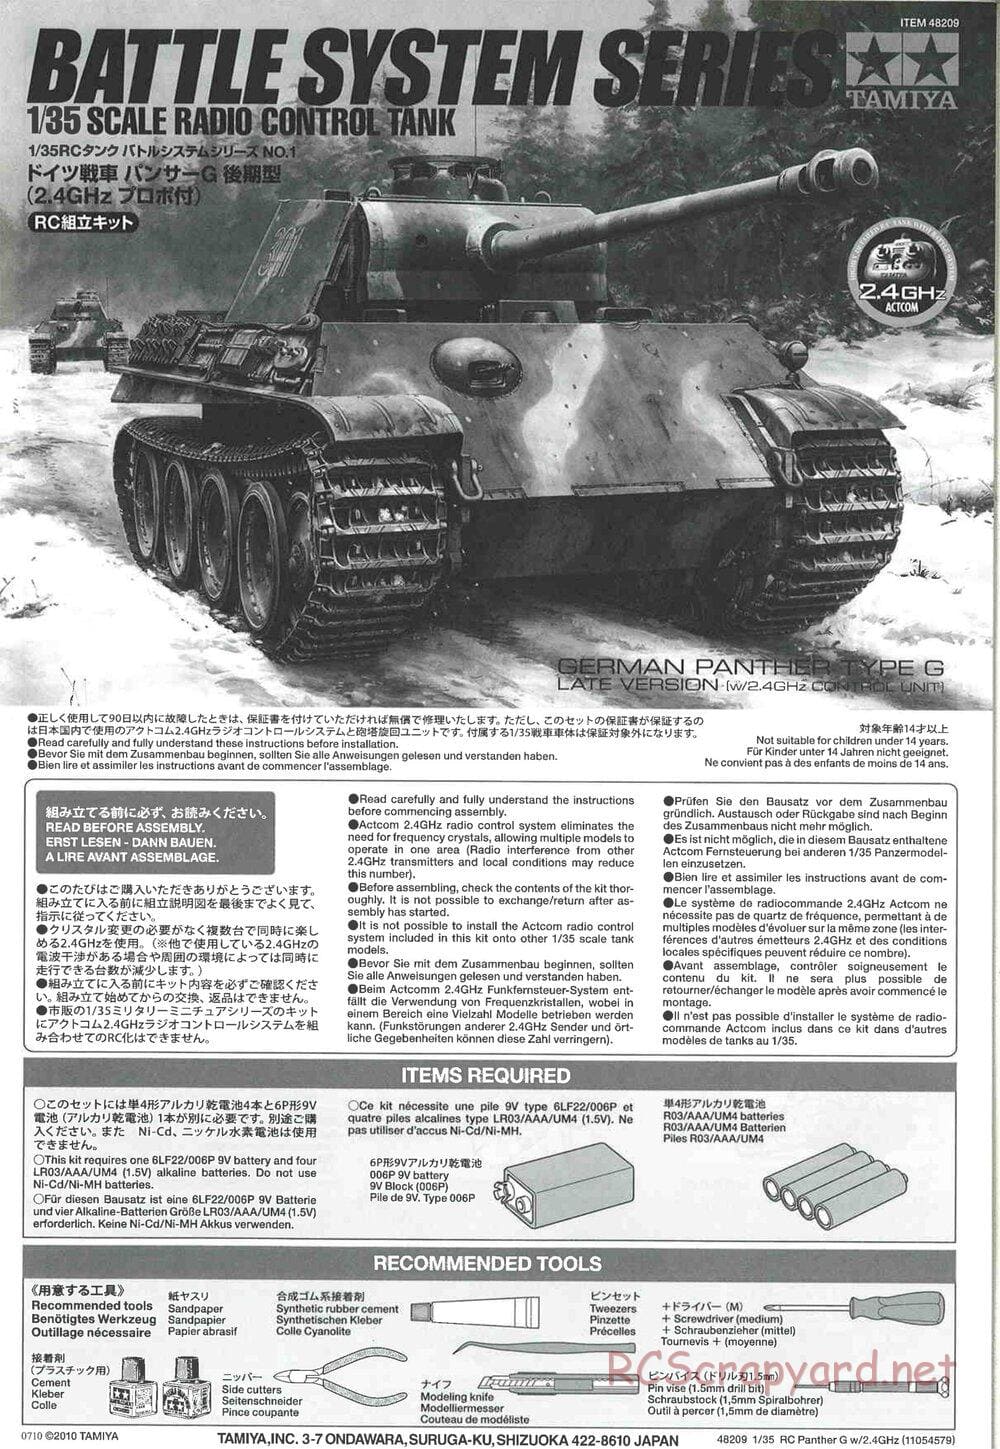 Tamiya - German Panther Type G - Late Version - 1/35 Scale Chassis - Manual - Page 1